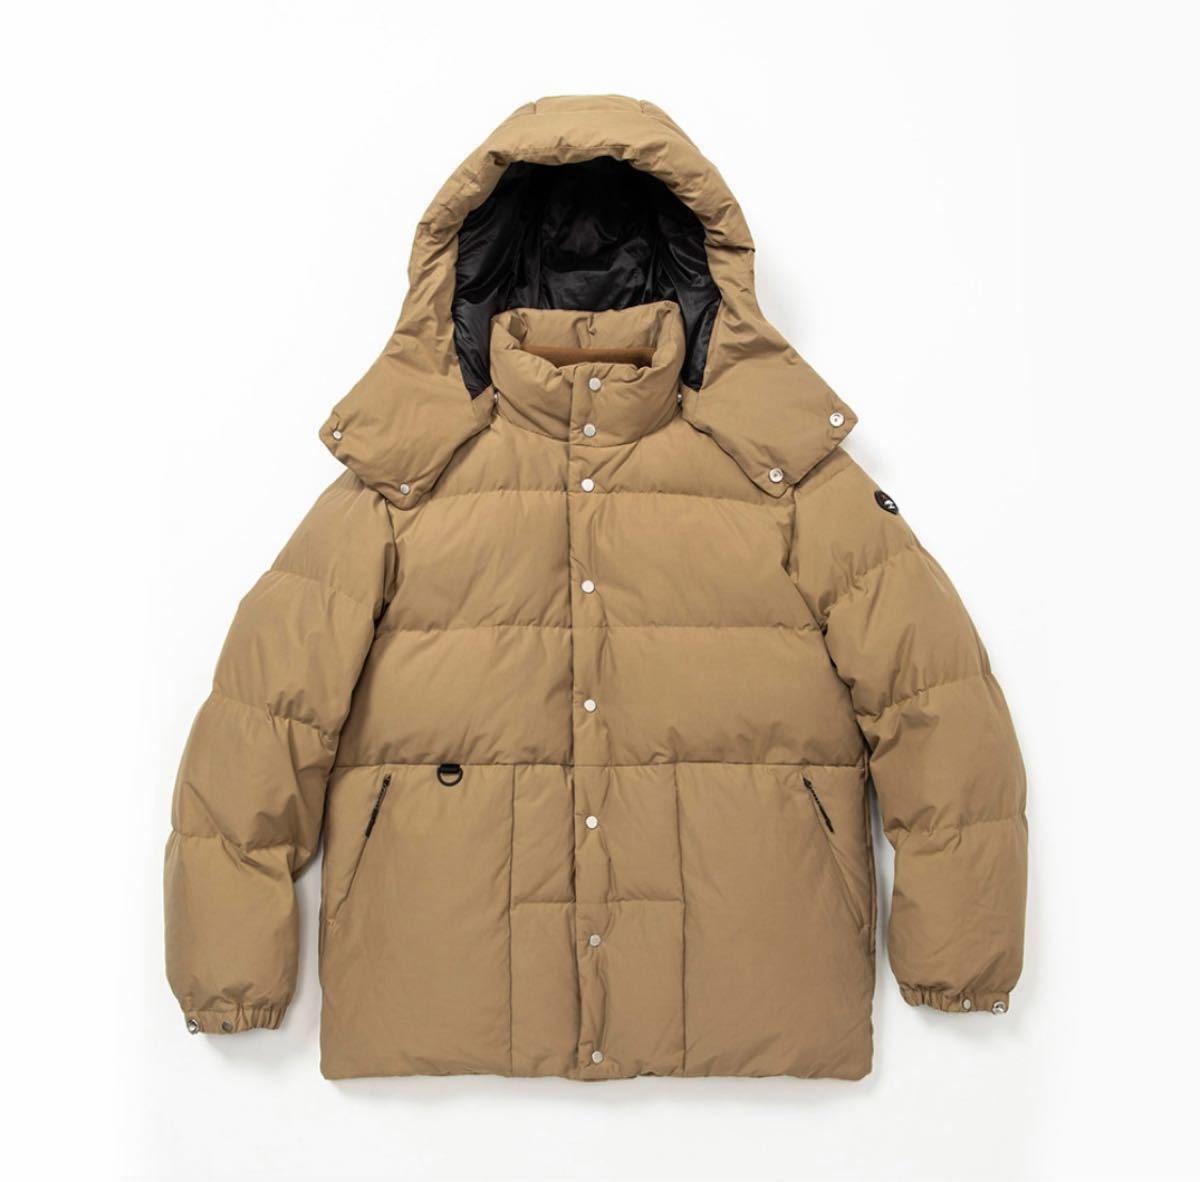 Y(dot) BY NORDISK NORDIC DOWN JACKET ワイドットバイノルディスク